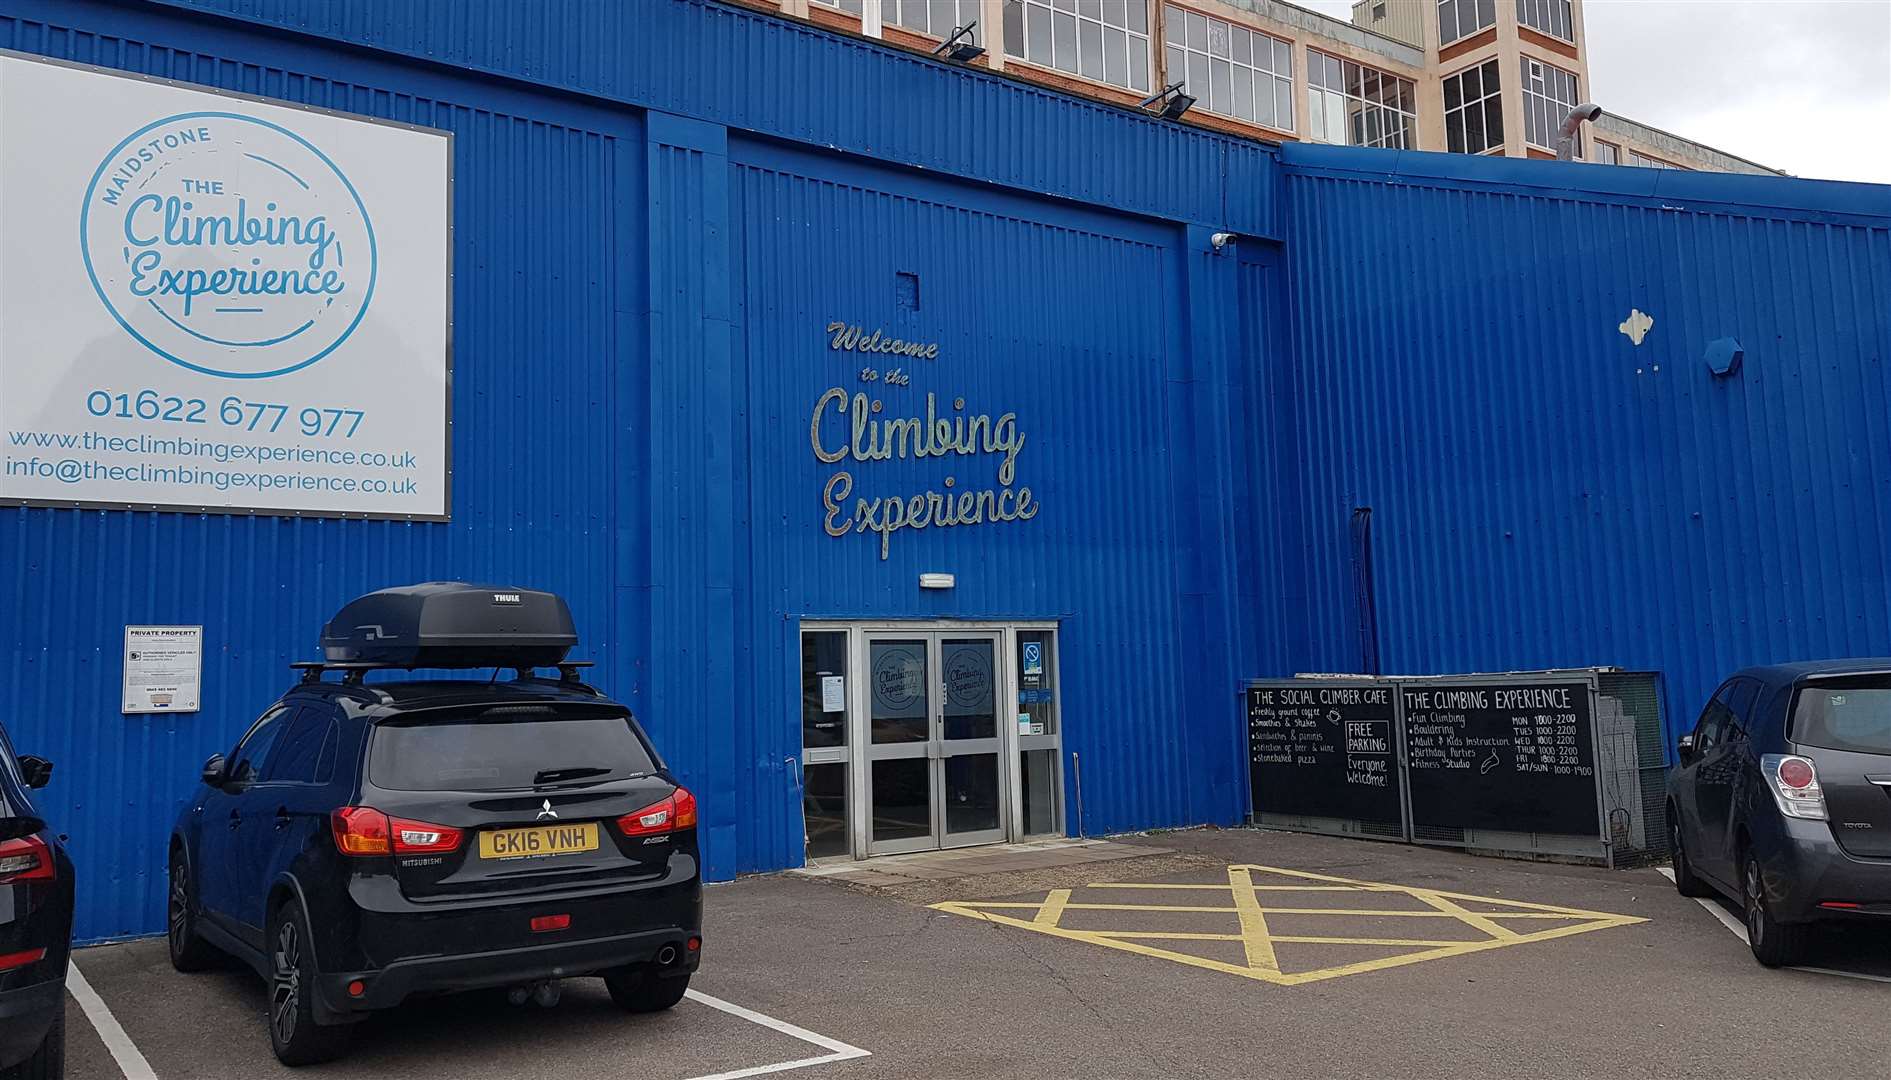 The Climbing Experience in St Peter's Street, Maidstone